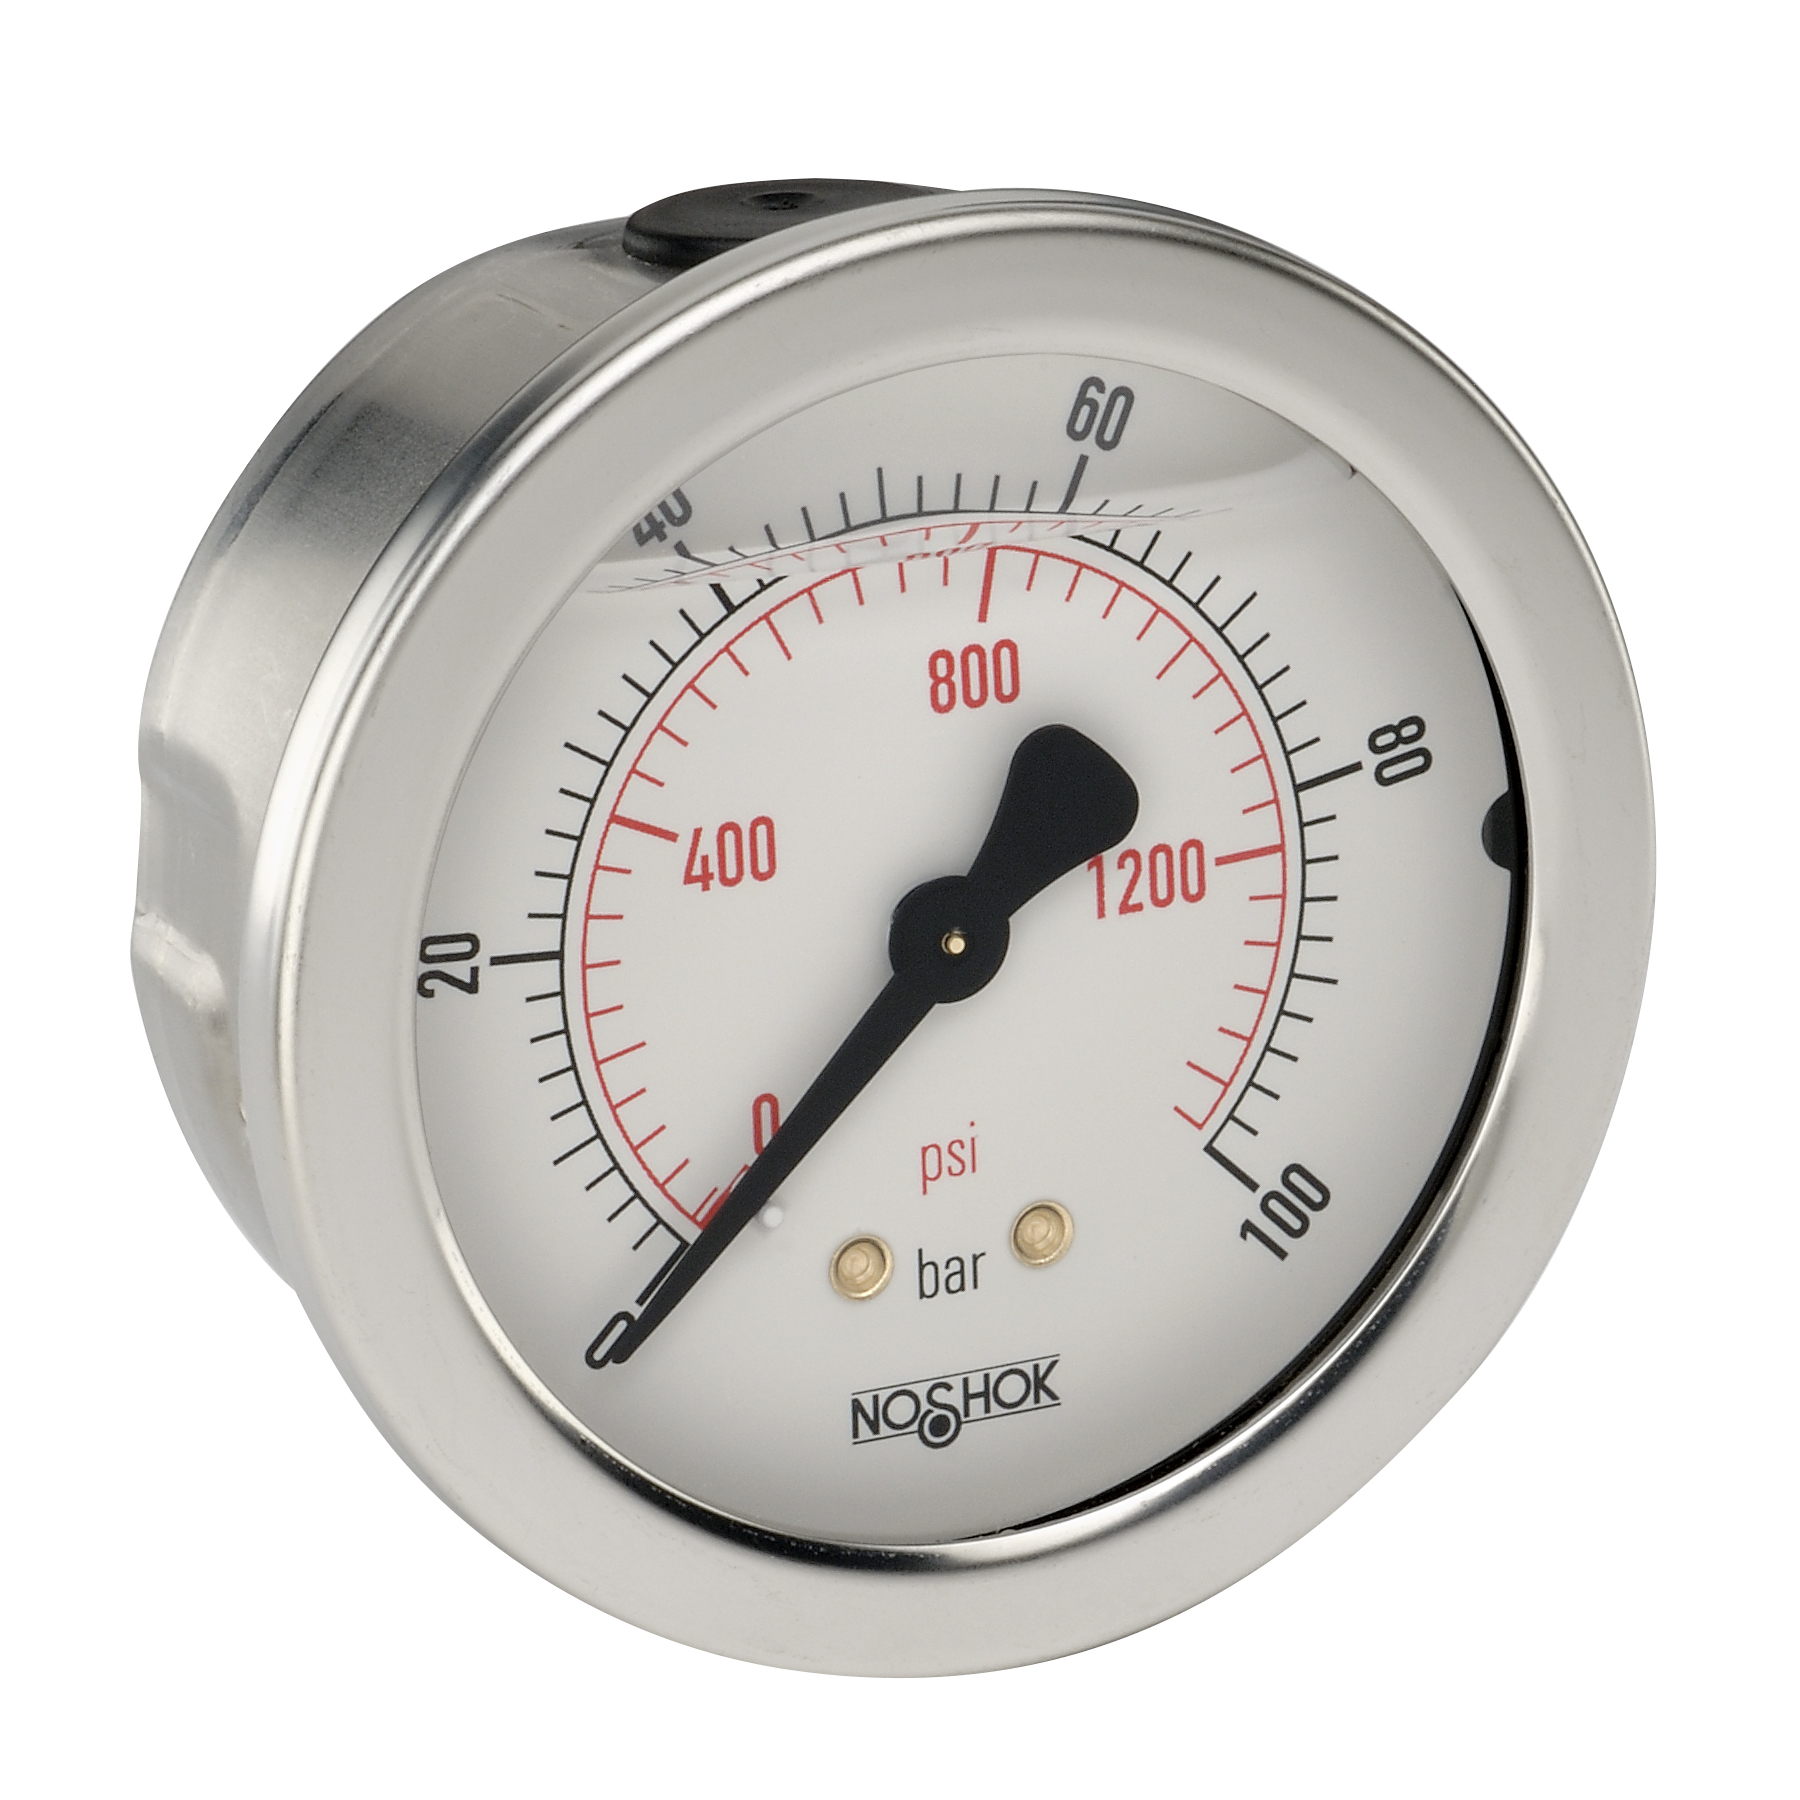 25-911-100-bar/psi-G1/4-PMC 900 Series ABS and Stainless Steel Liquid Filled Pressure Gauges